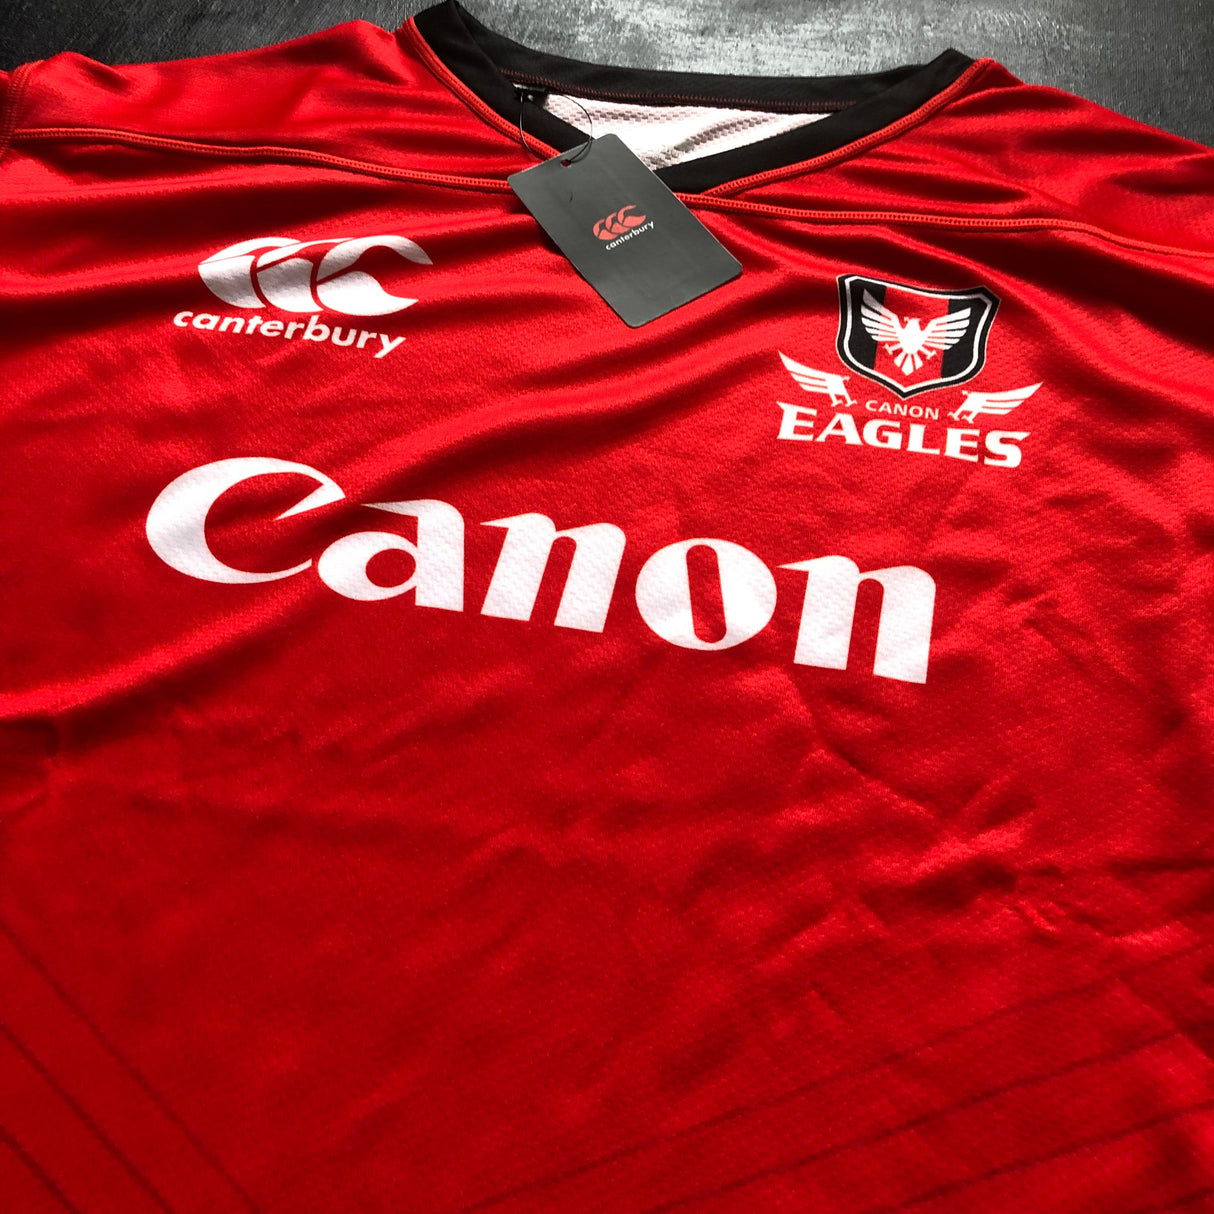 Canon Eagles Rugby Team Jersey 2020 (Japan Top League) 5L BNWT Underdog Rugby - The Tier 2 Rugby Shop 